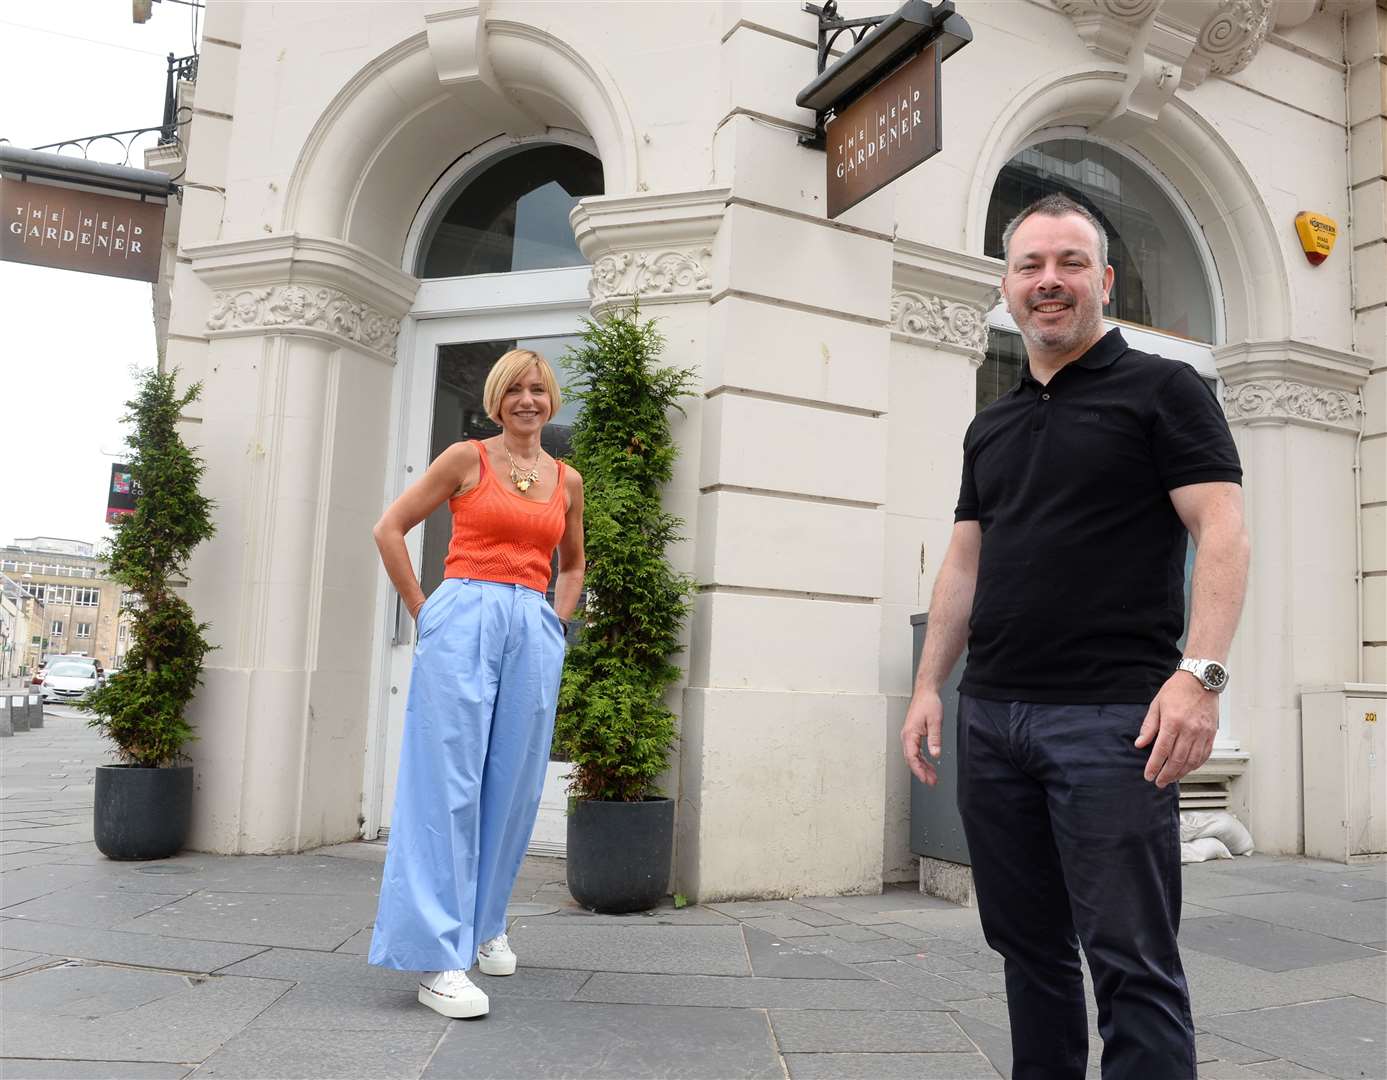 Salon owner Alison McRitchie allowed Keith McCaffery to use her closed premises as a pop up shop.